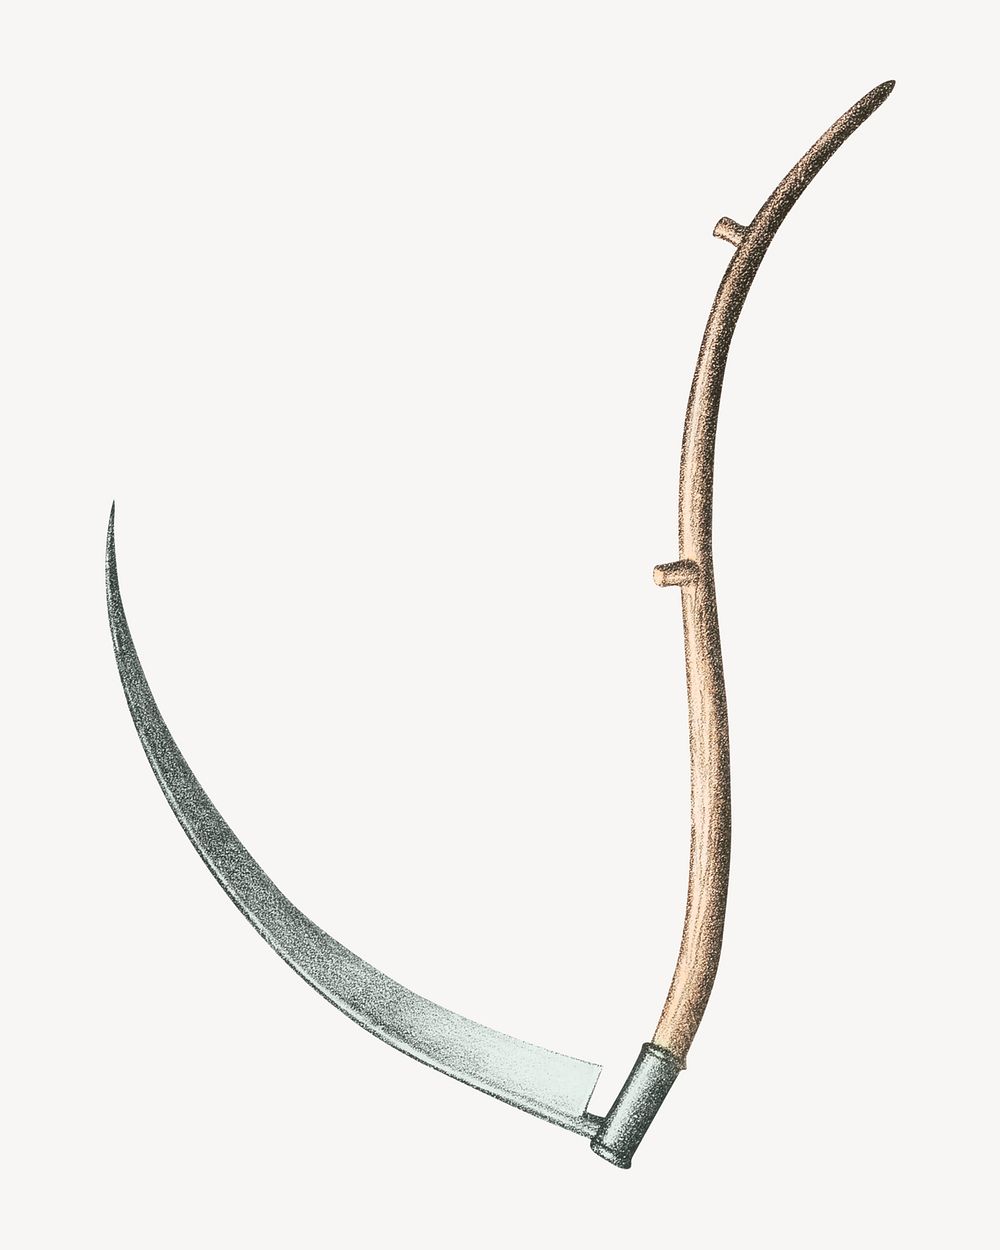 Vintage sickle illustration. Remixed by rawpixel.